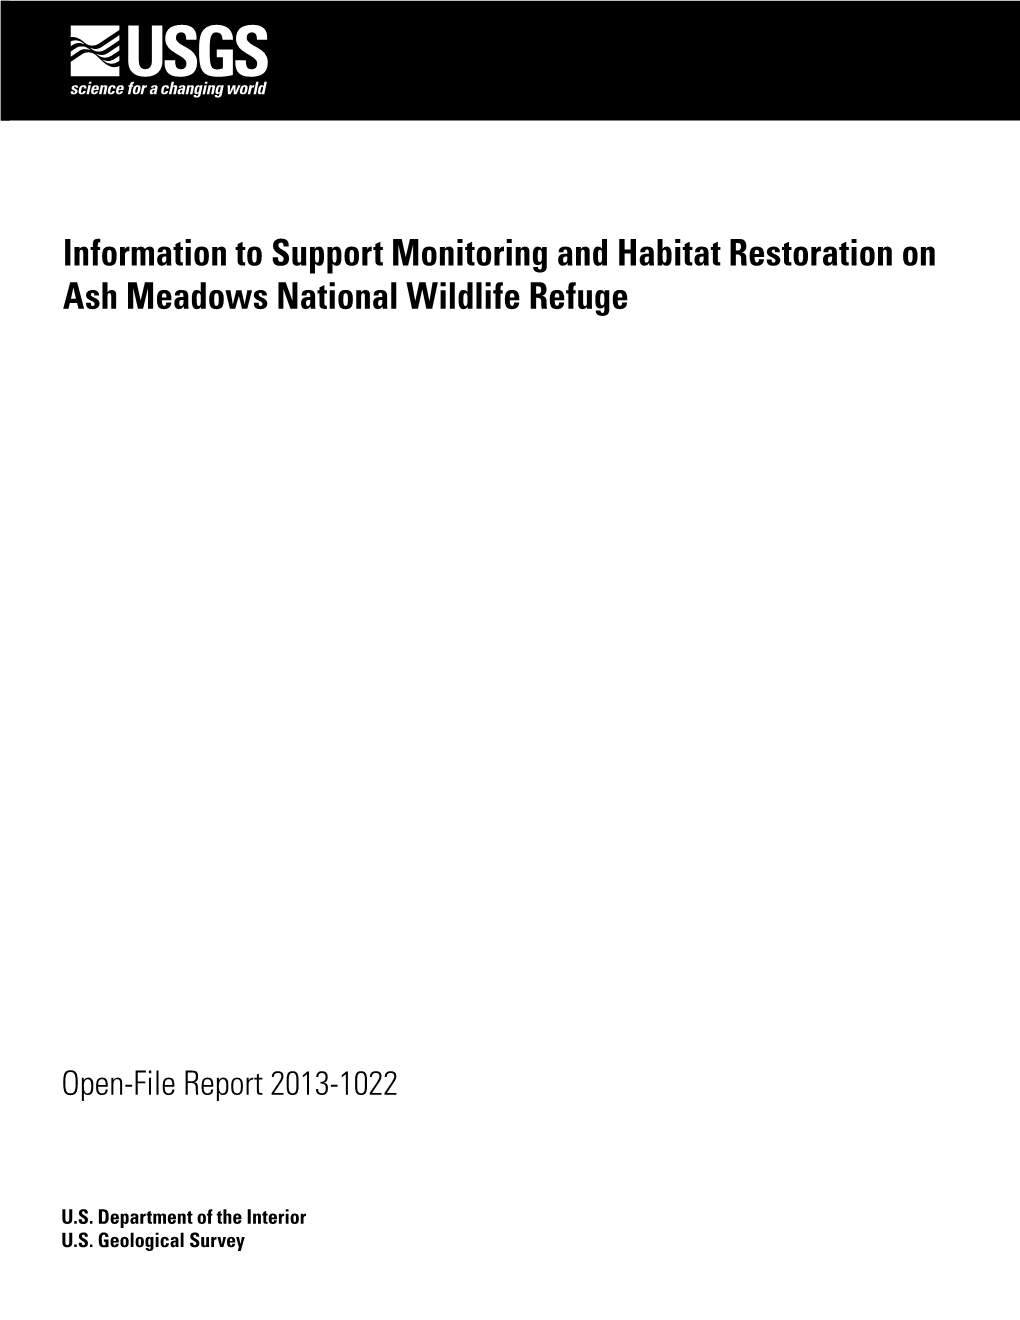 Information to Support Monitoring and Habitat Restoration on Ash Meadows National Wildlife Refuge